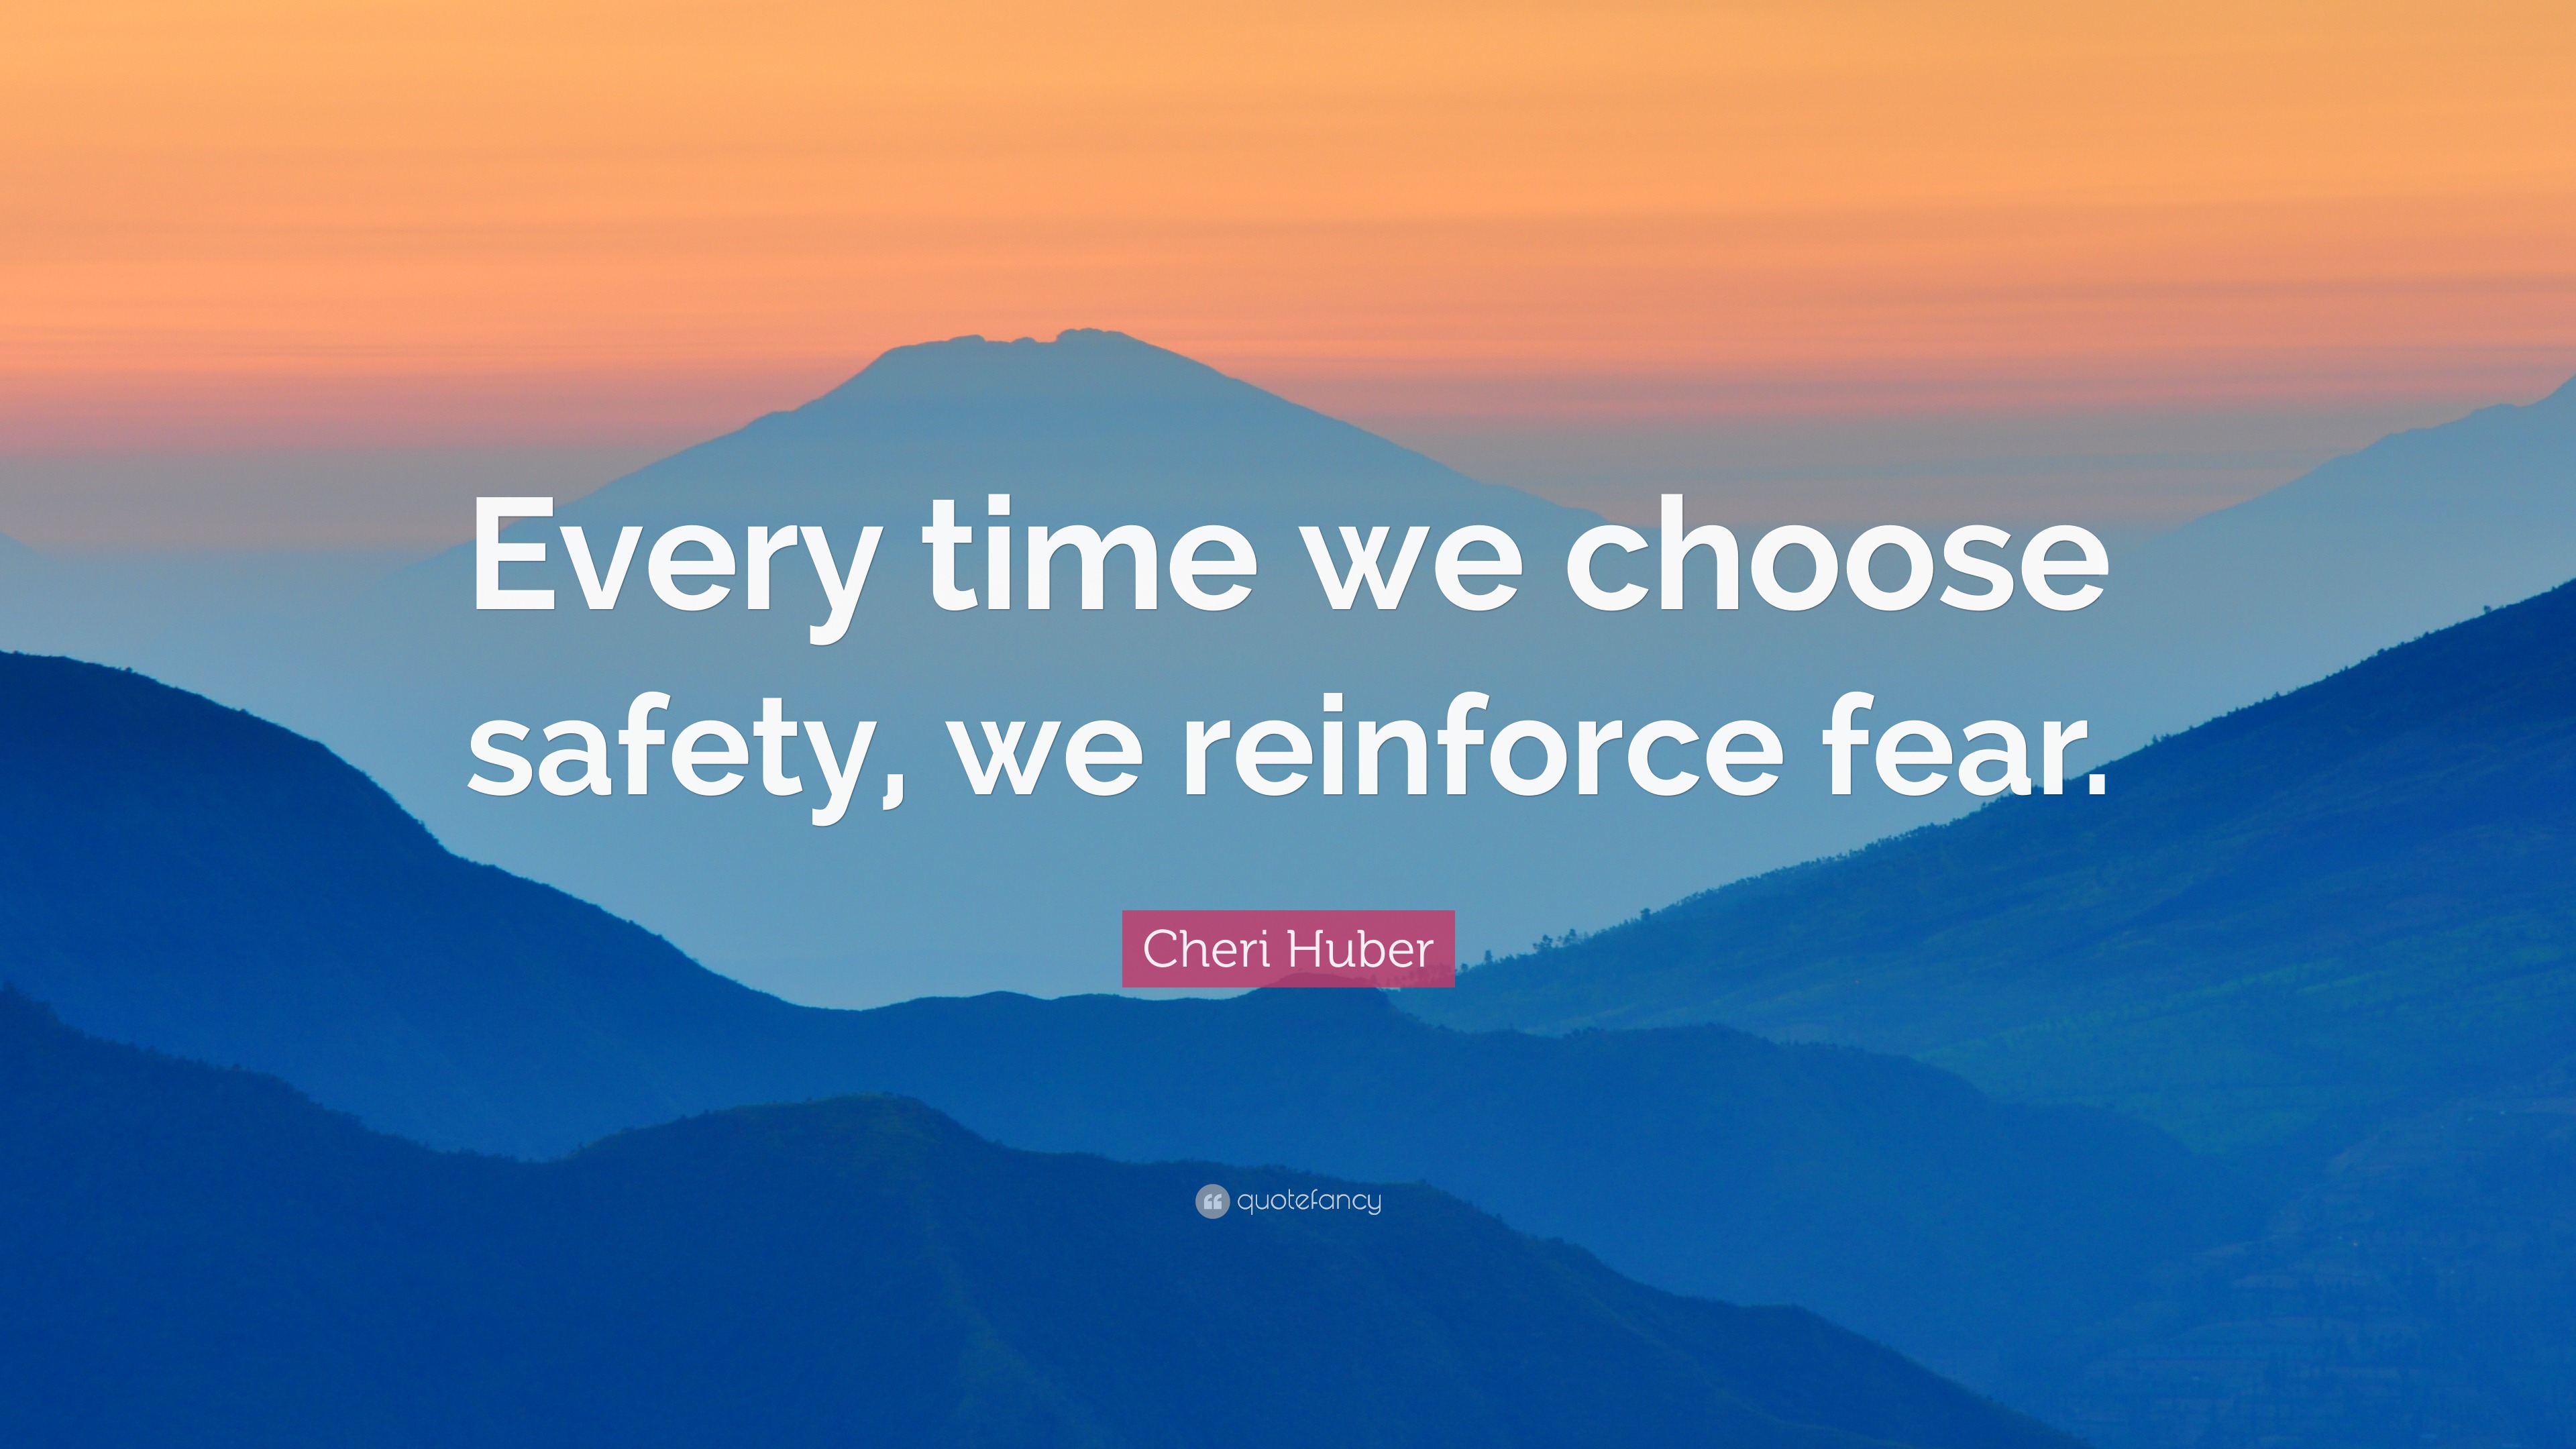 Cheri Huber Quote: “Every time we choose safety, we reinforce fear.”